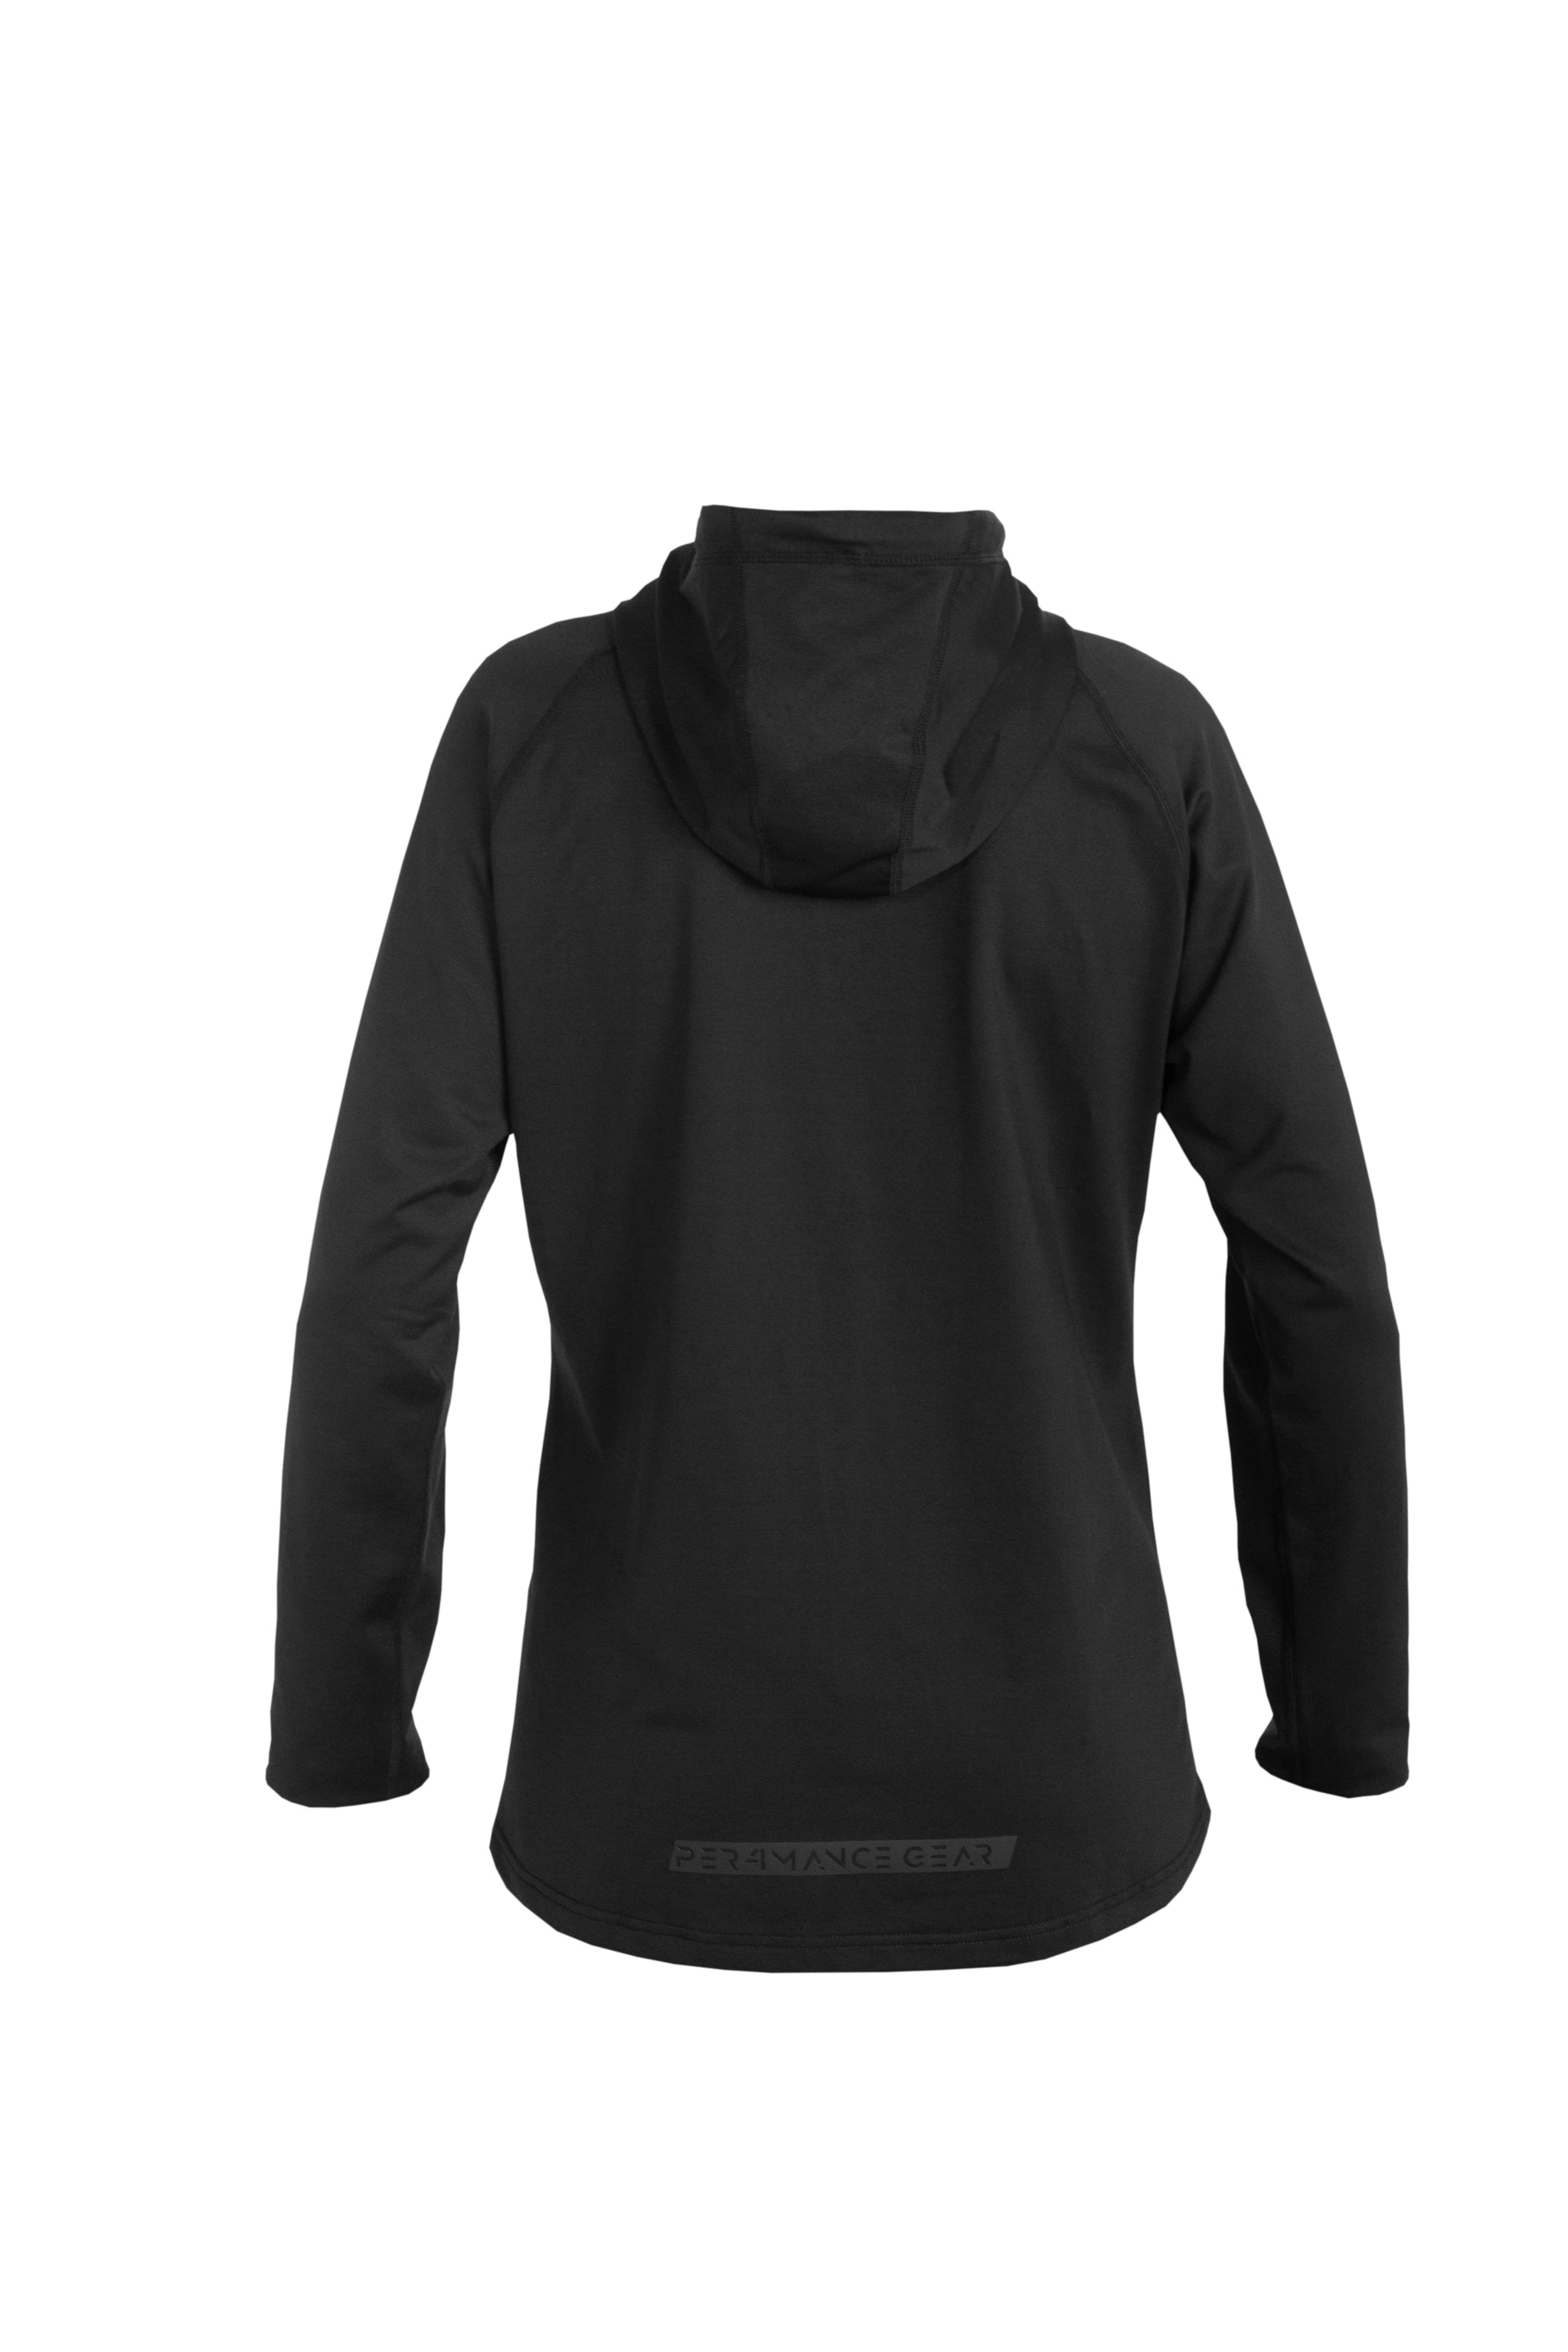 Alissa Women's P4G Therapeutic Hooded Jacket | Back on Track - Back on ...